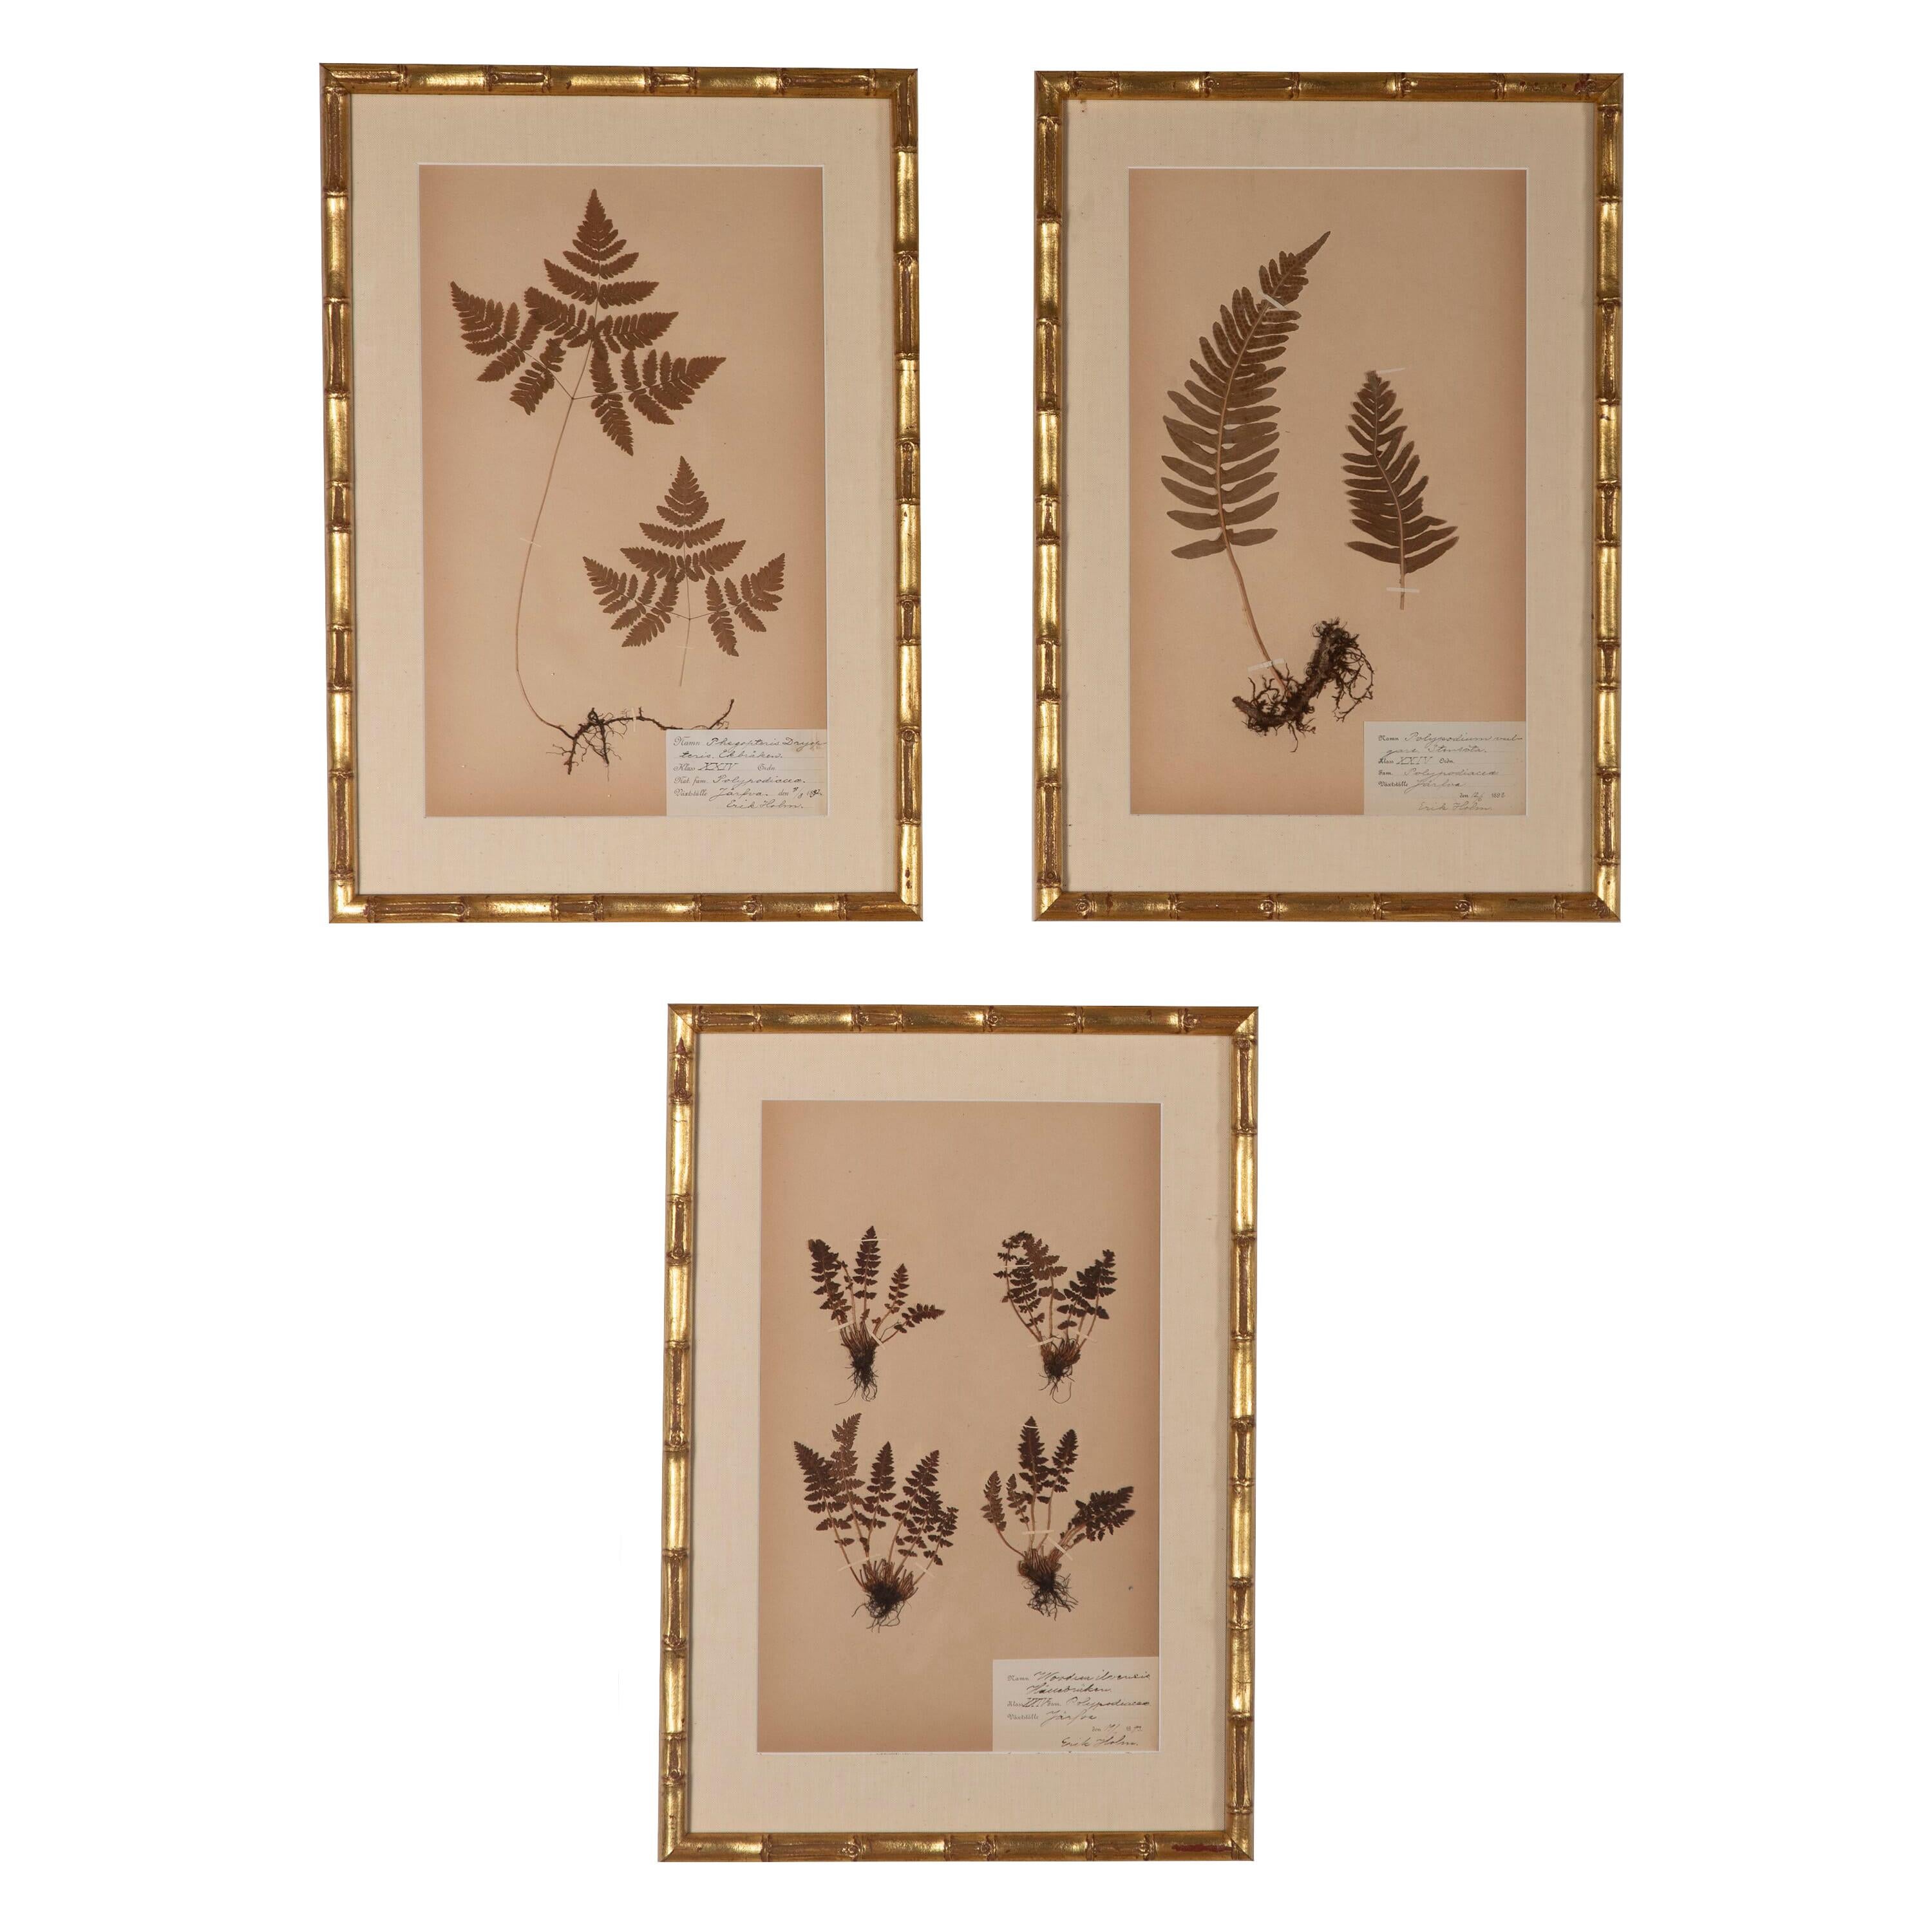 Paper Collection of Six 19th Century Ferns